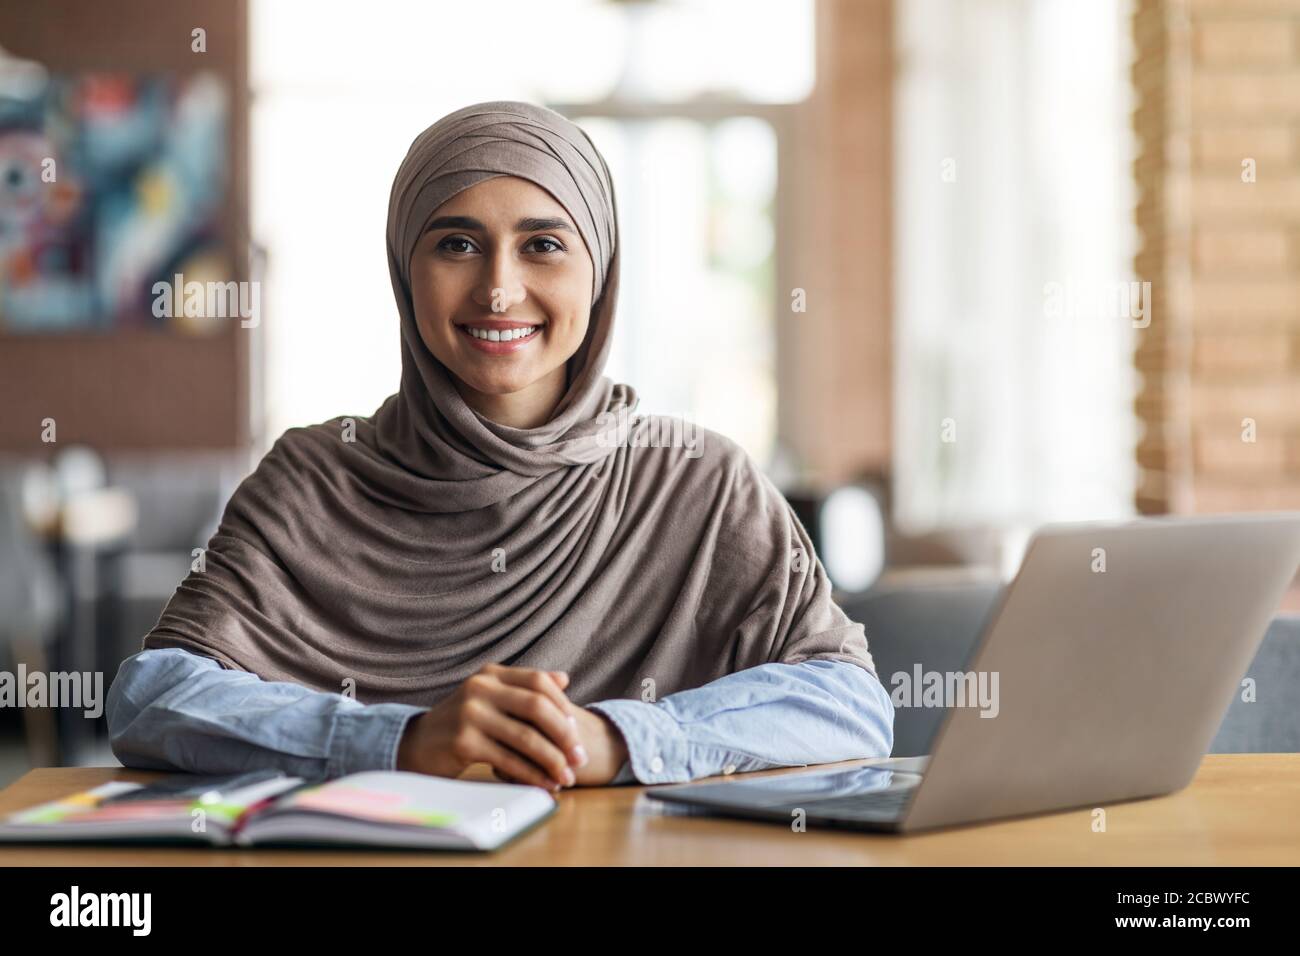 Smiling arab girl looking for job online, sitting at cafe Stock Photo